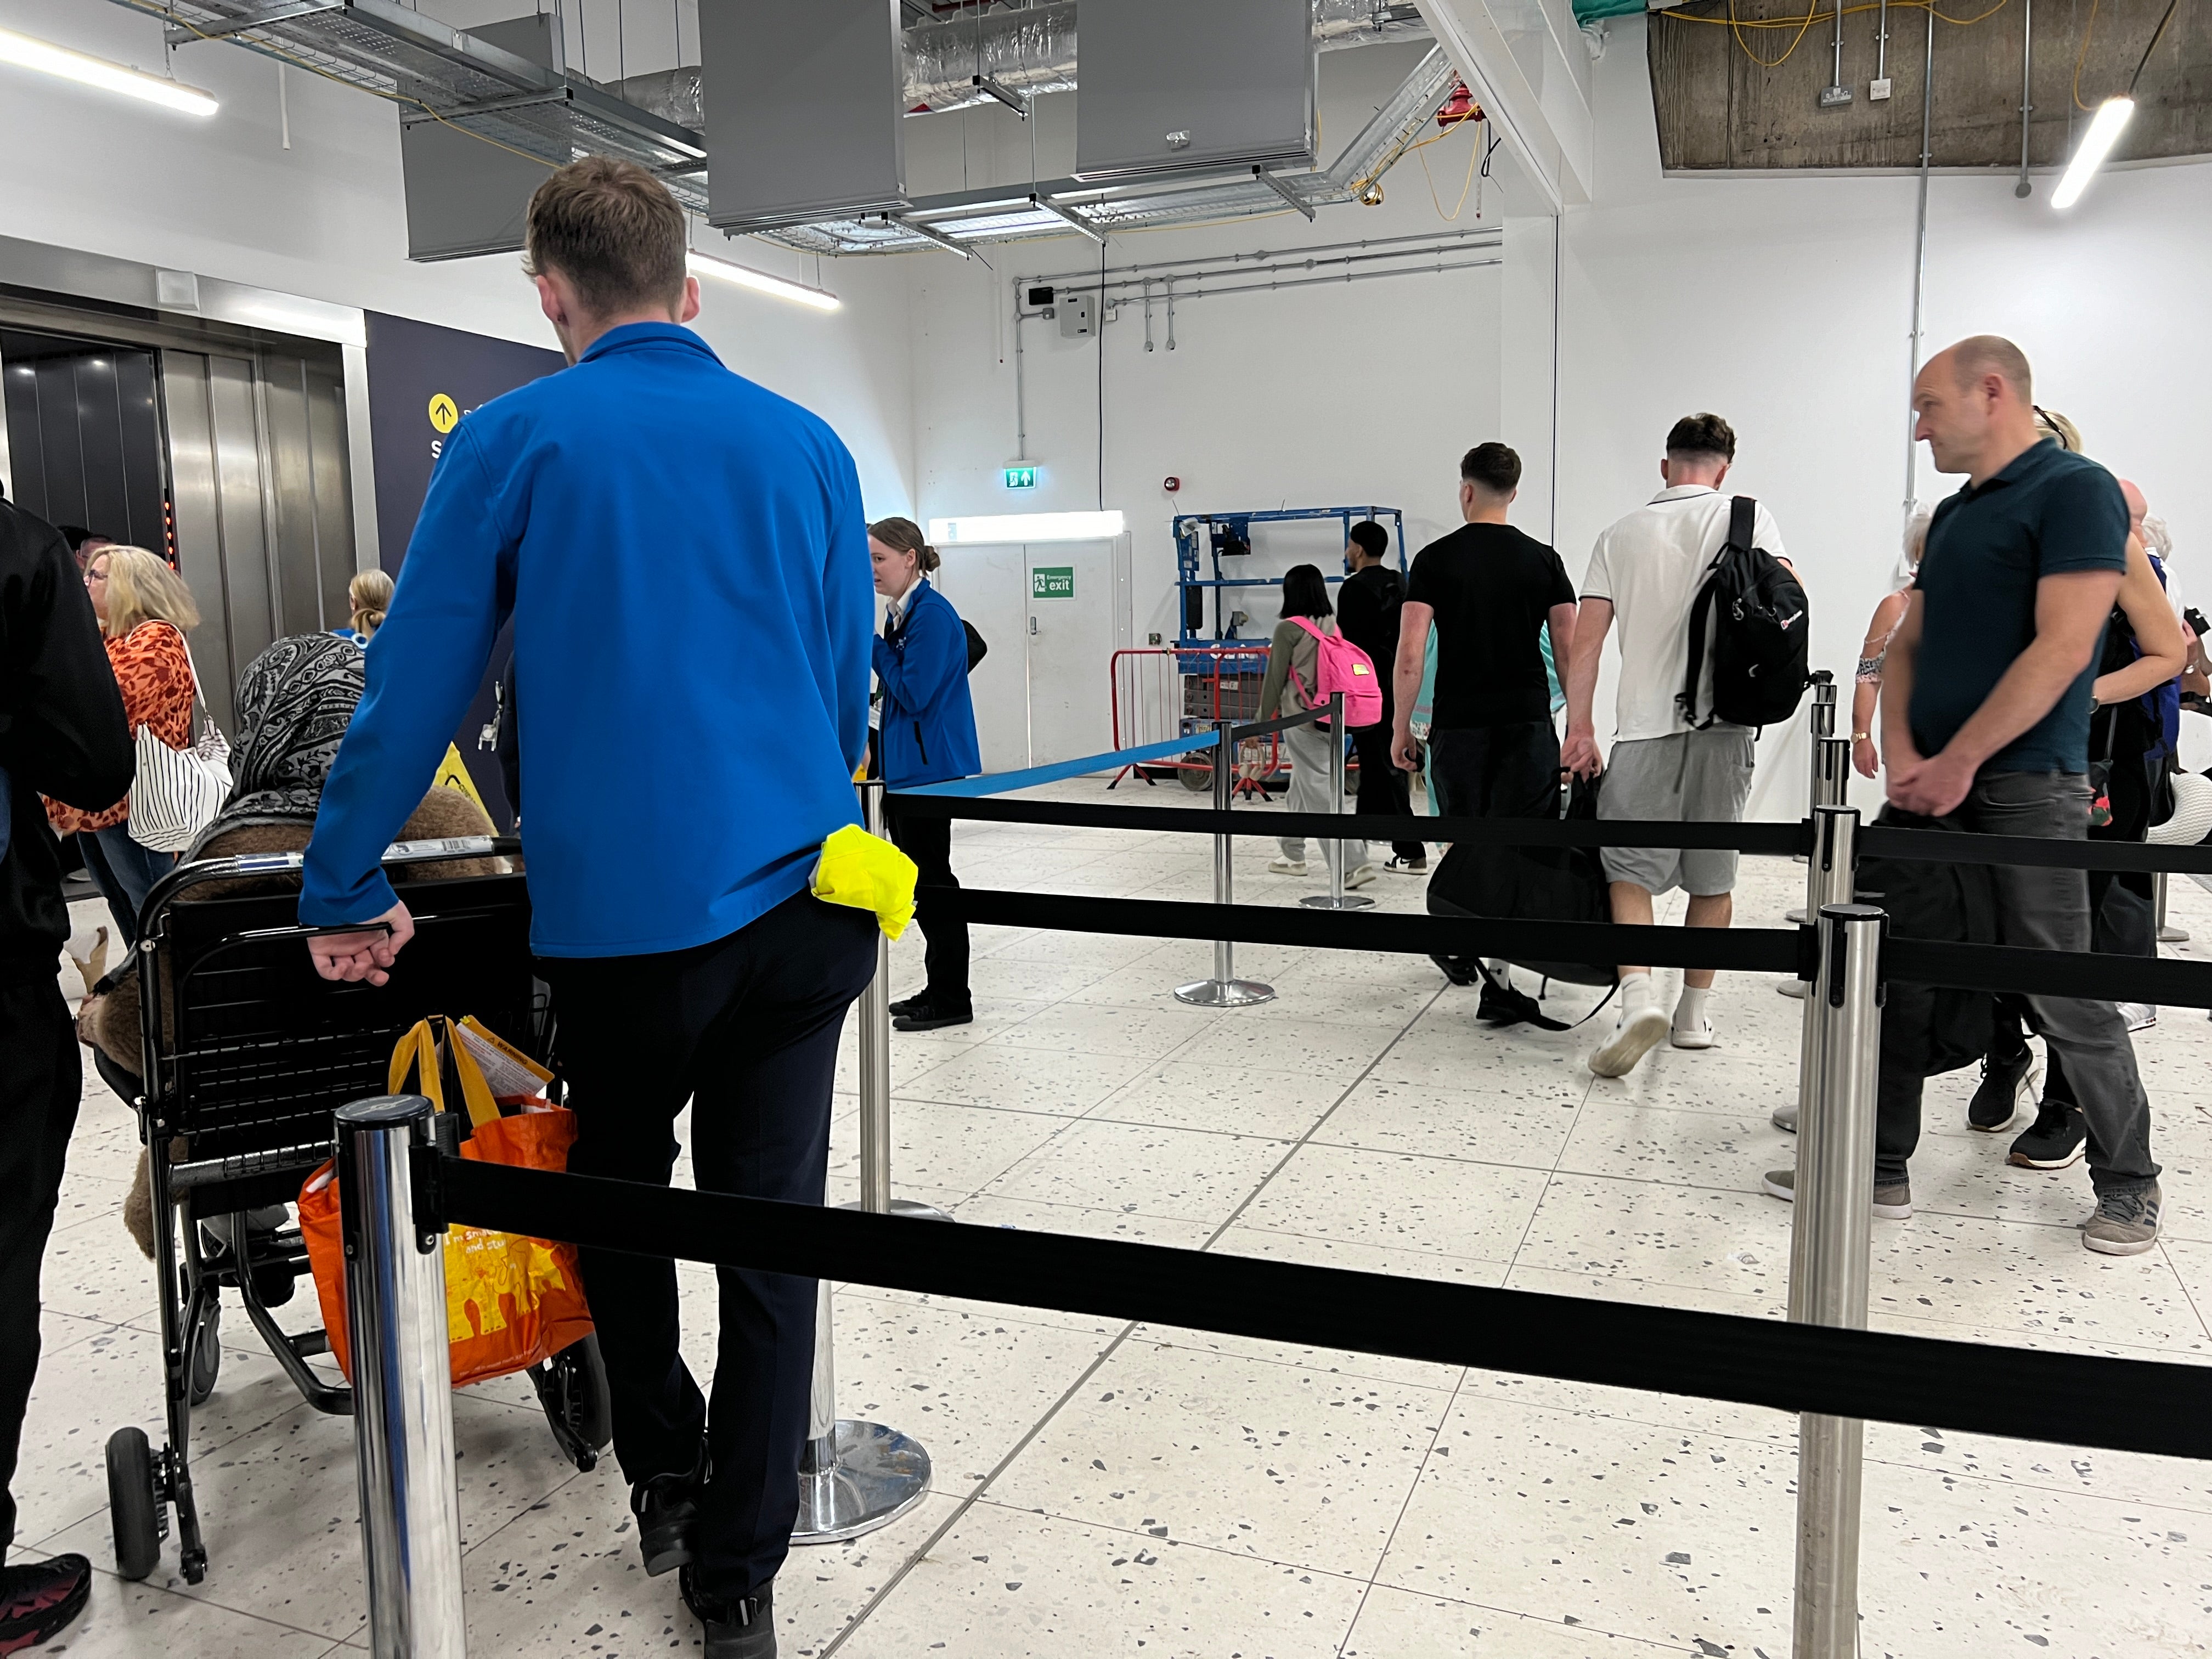 Passengers have recently faced some long queues at Birmingham airport